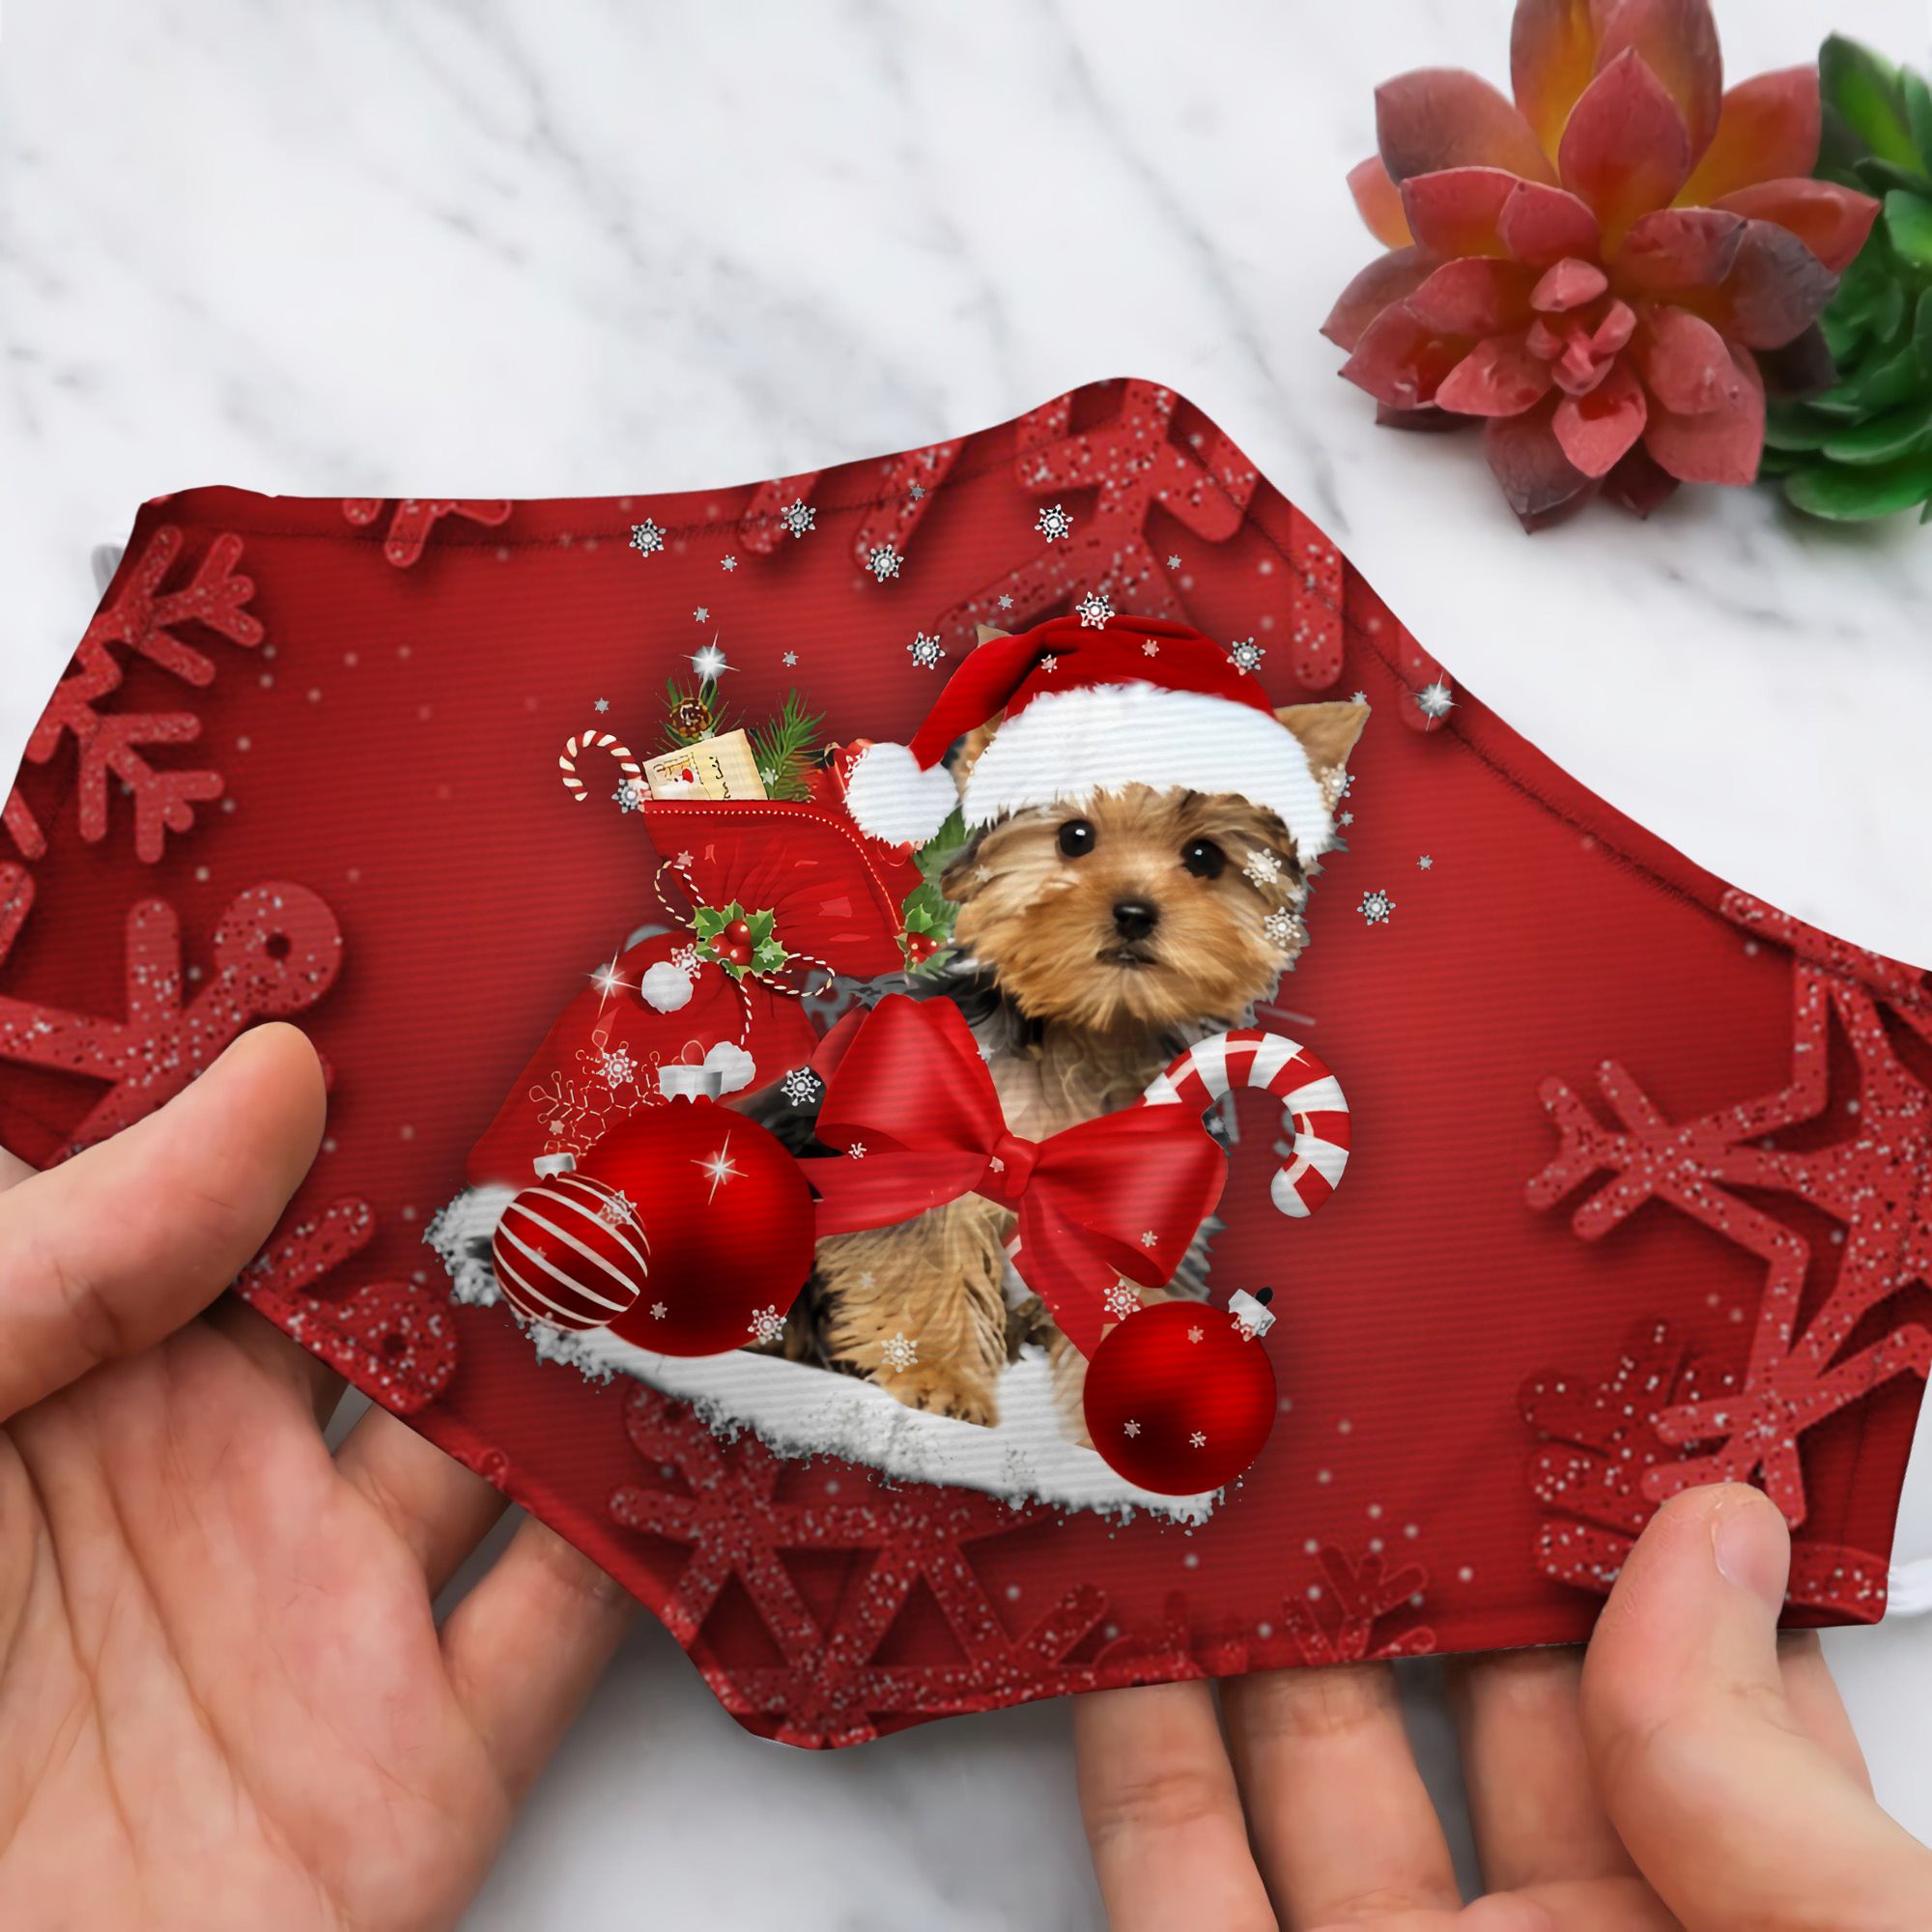 The Yorkshire Terrier dog Christmas face mask